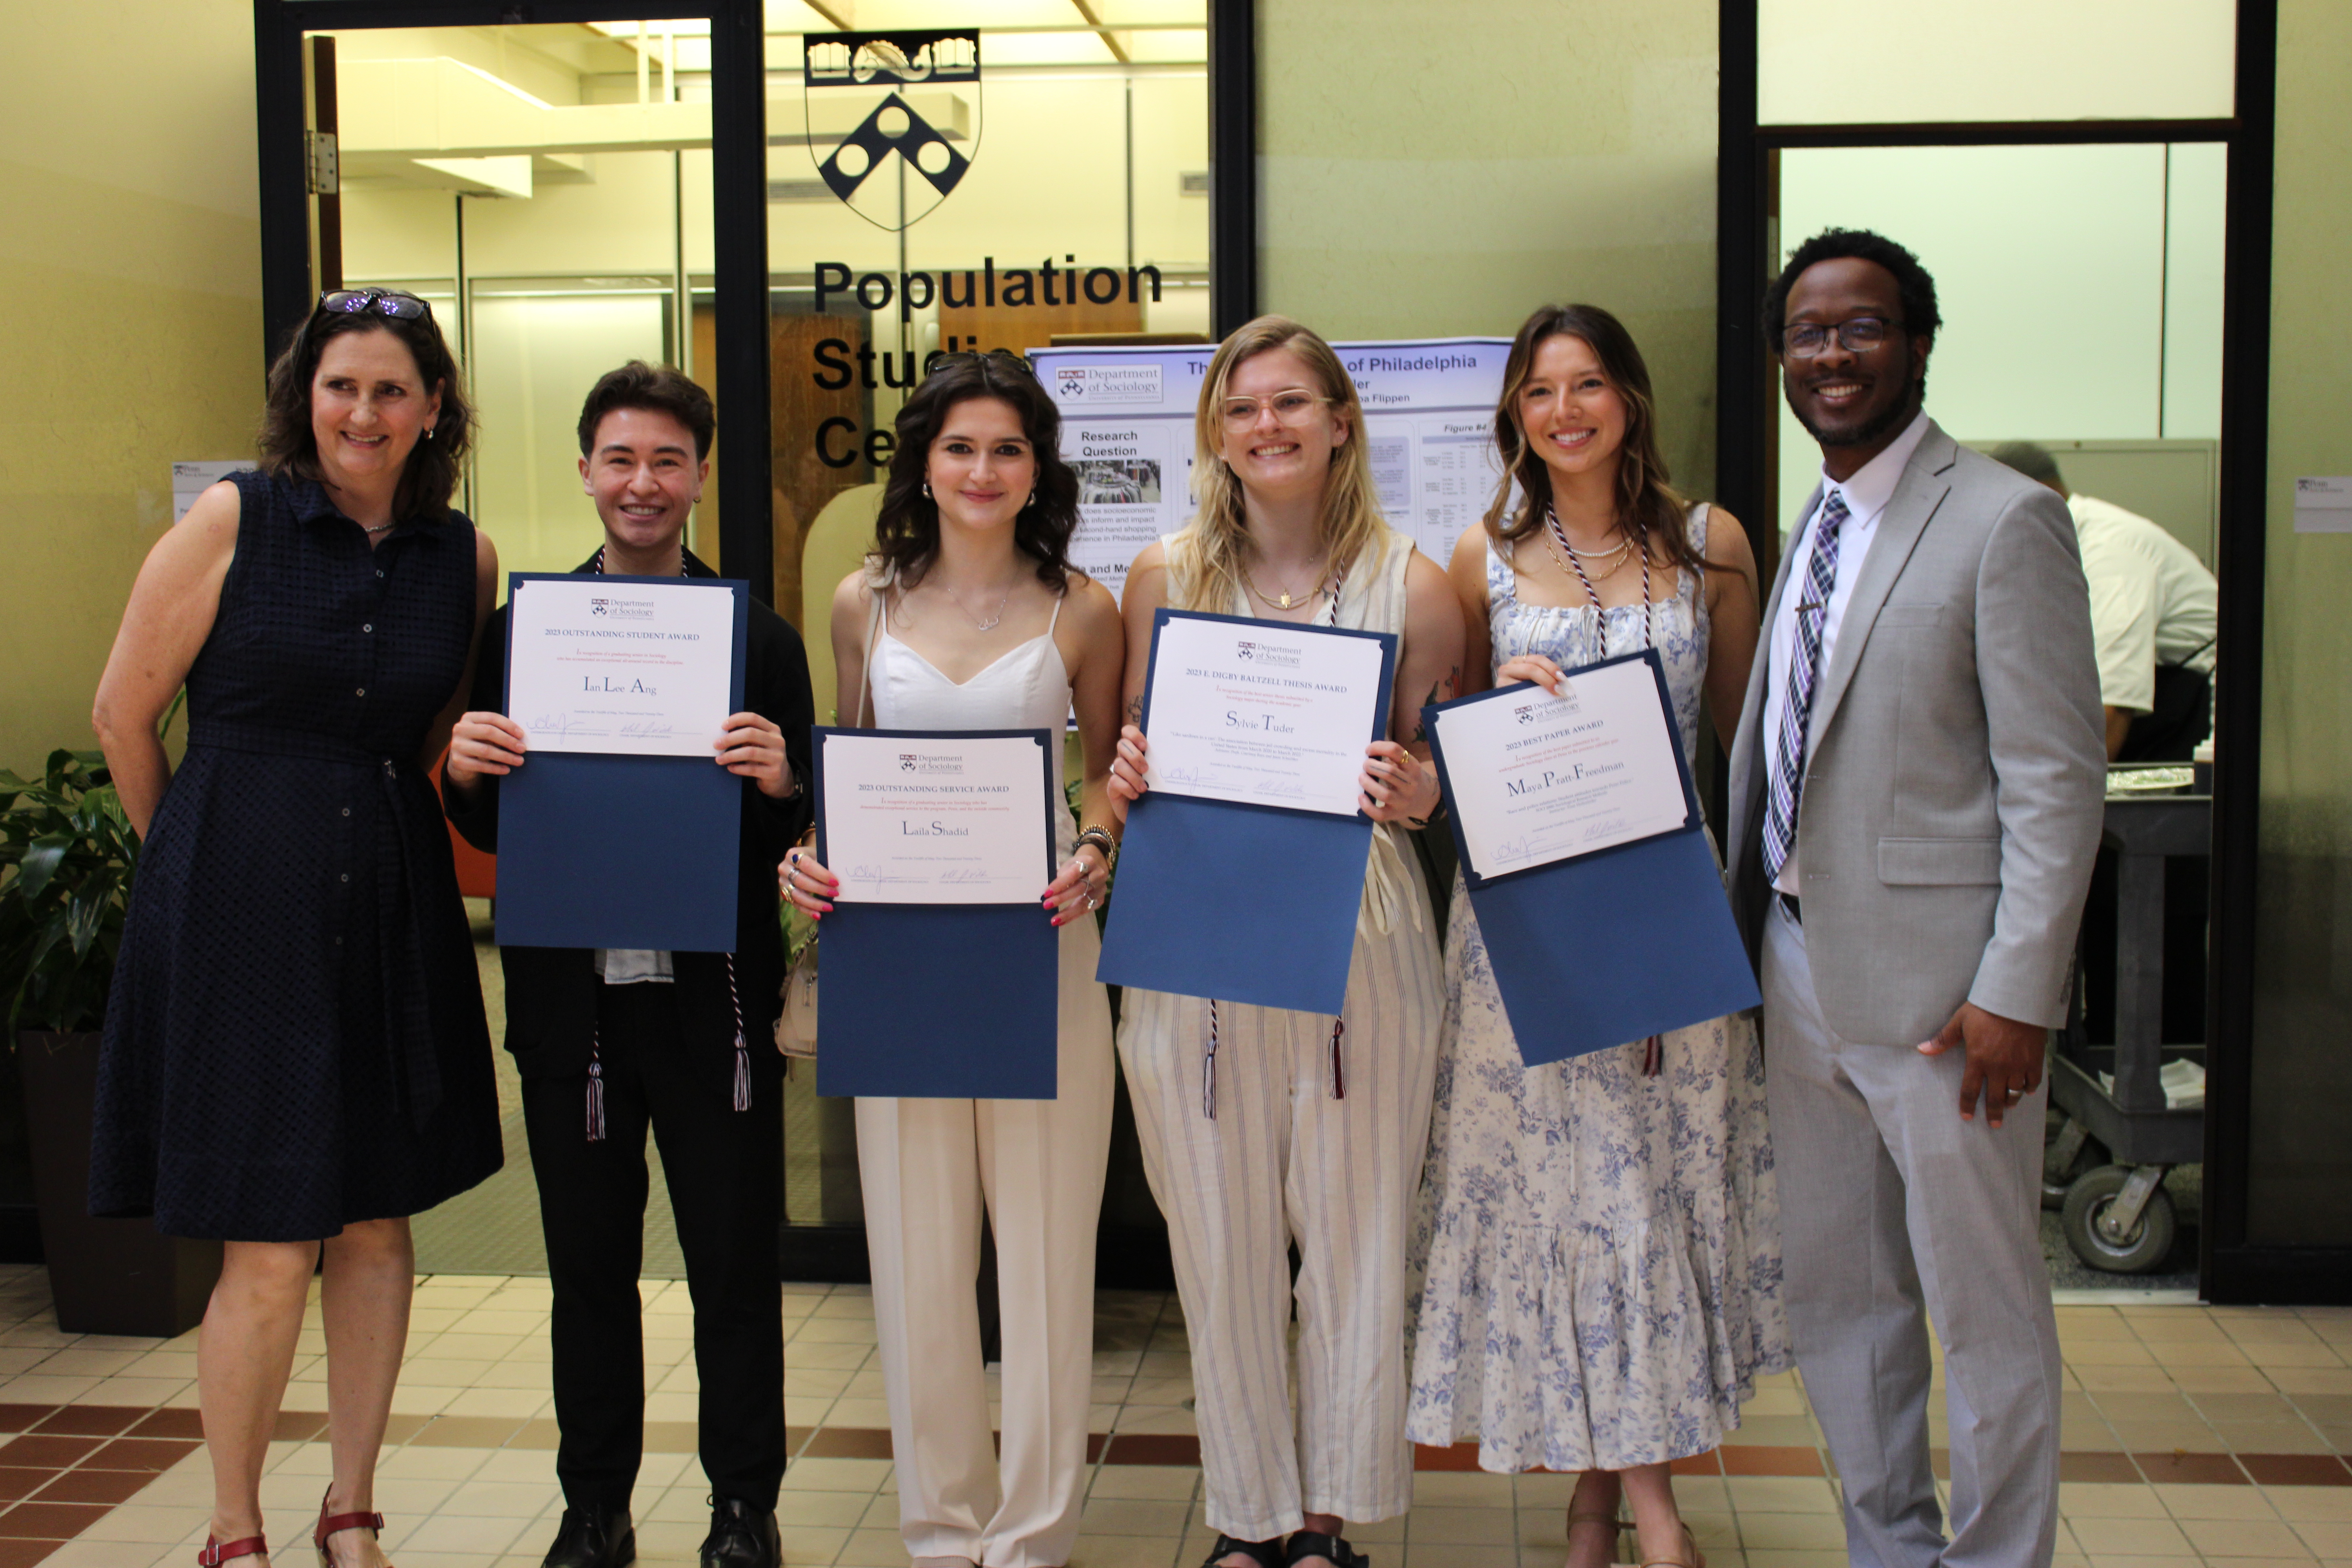 Scholar Awards for Sociology Students